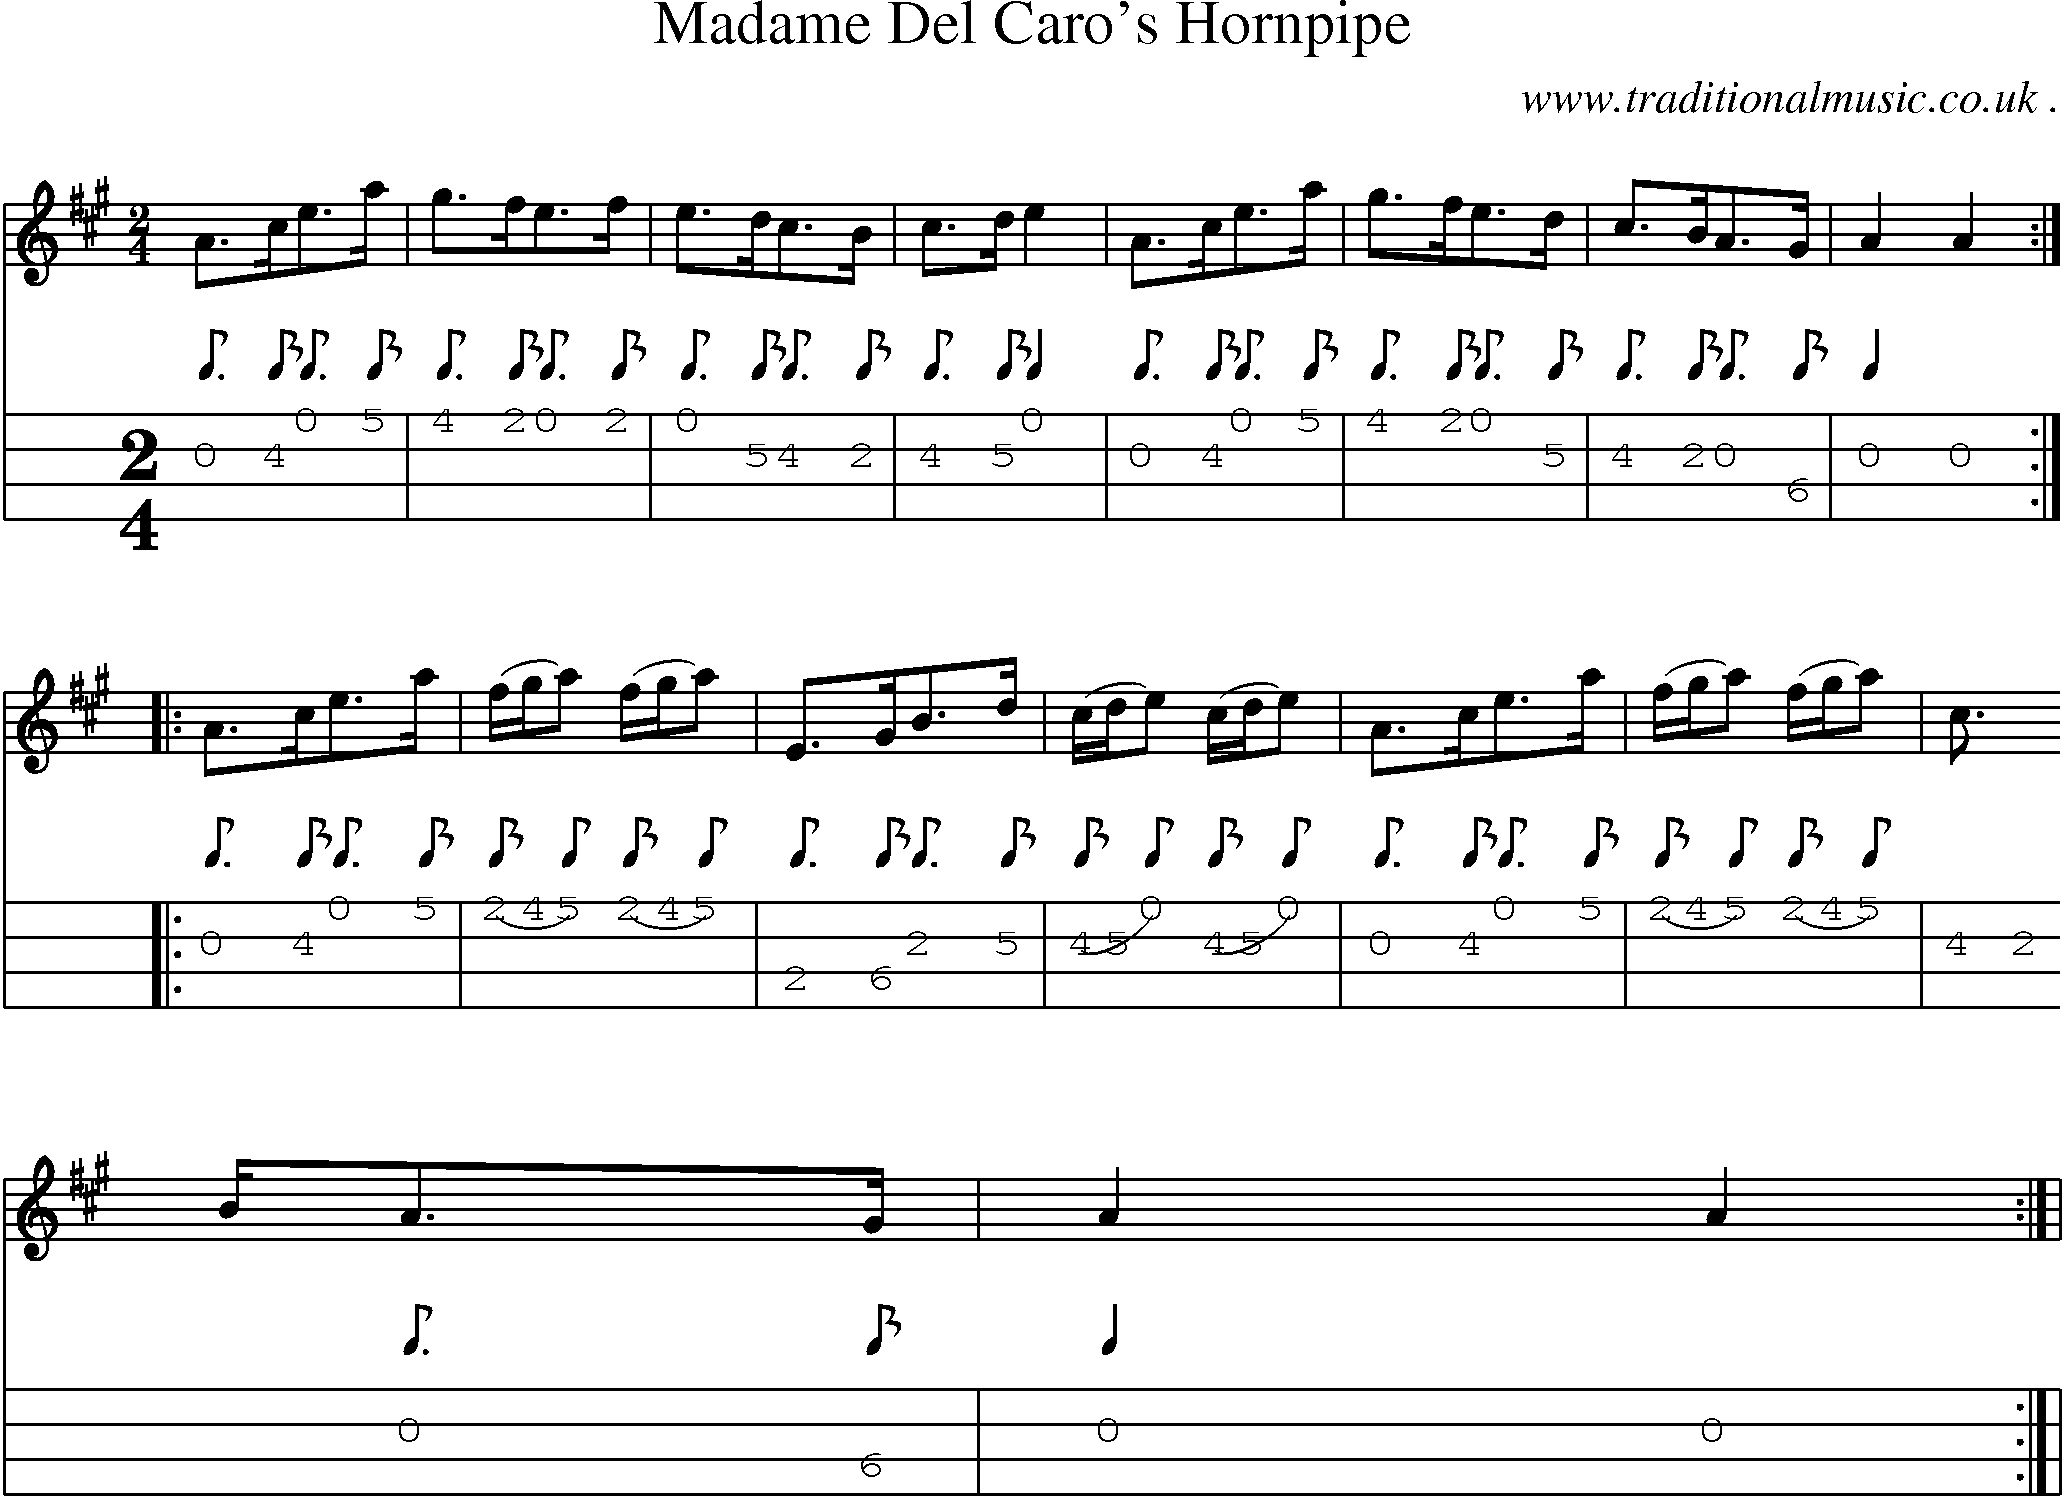 Sheet-Music and Mandolin Tabs for Madame Del Caros Hornpipe